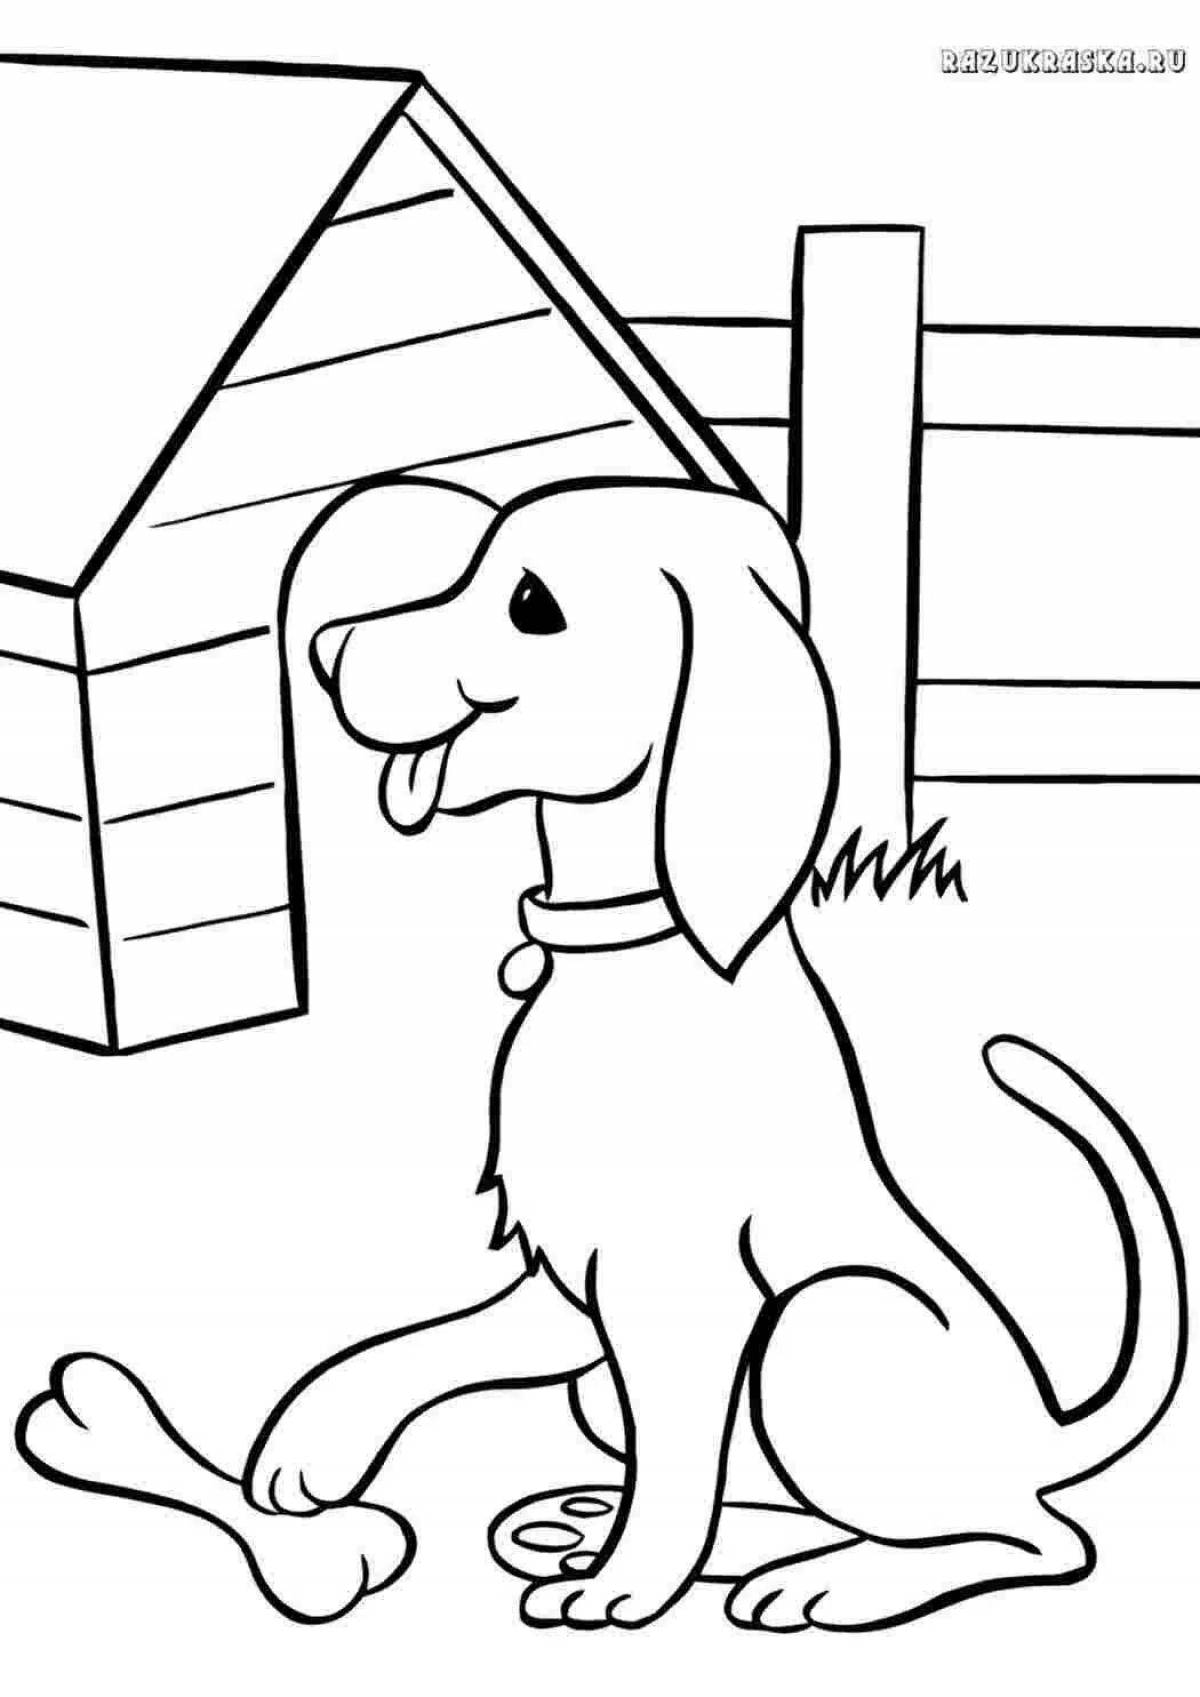 Colouring bright dog house